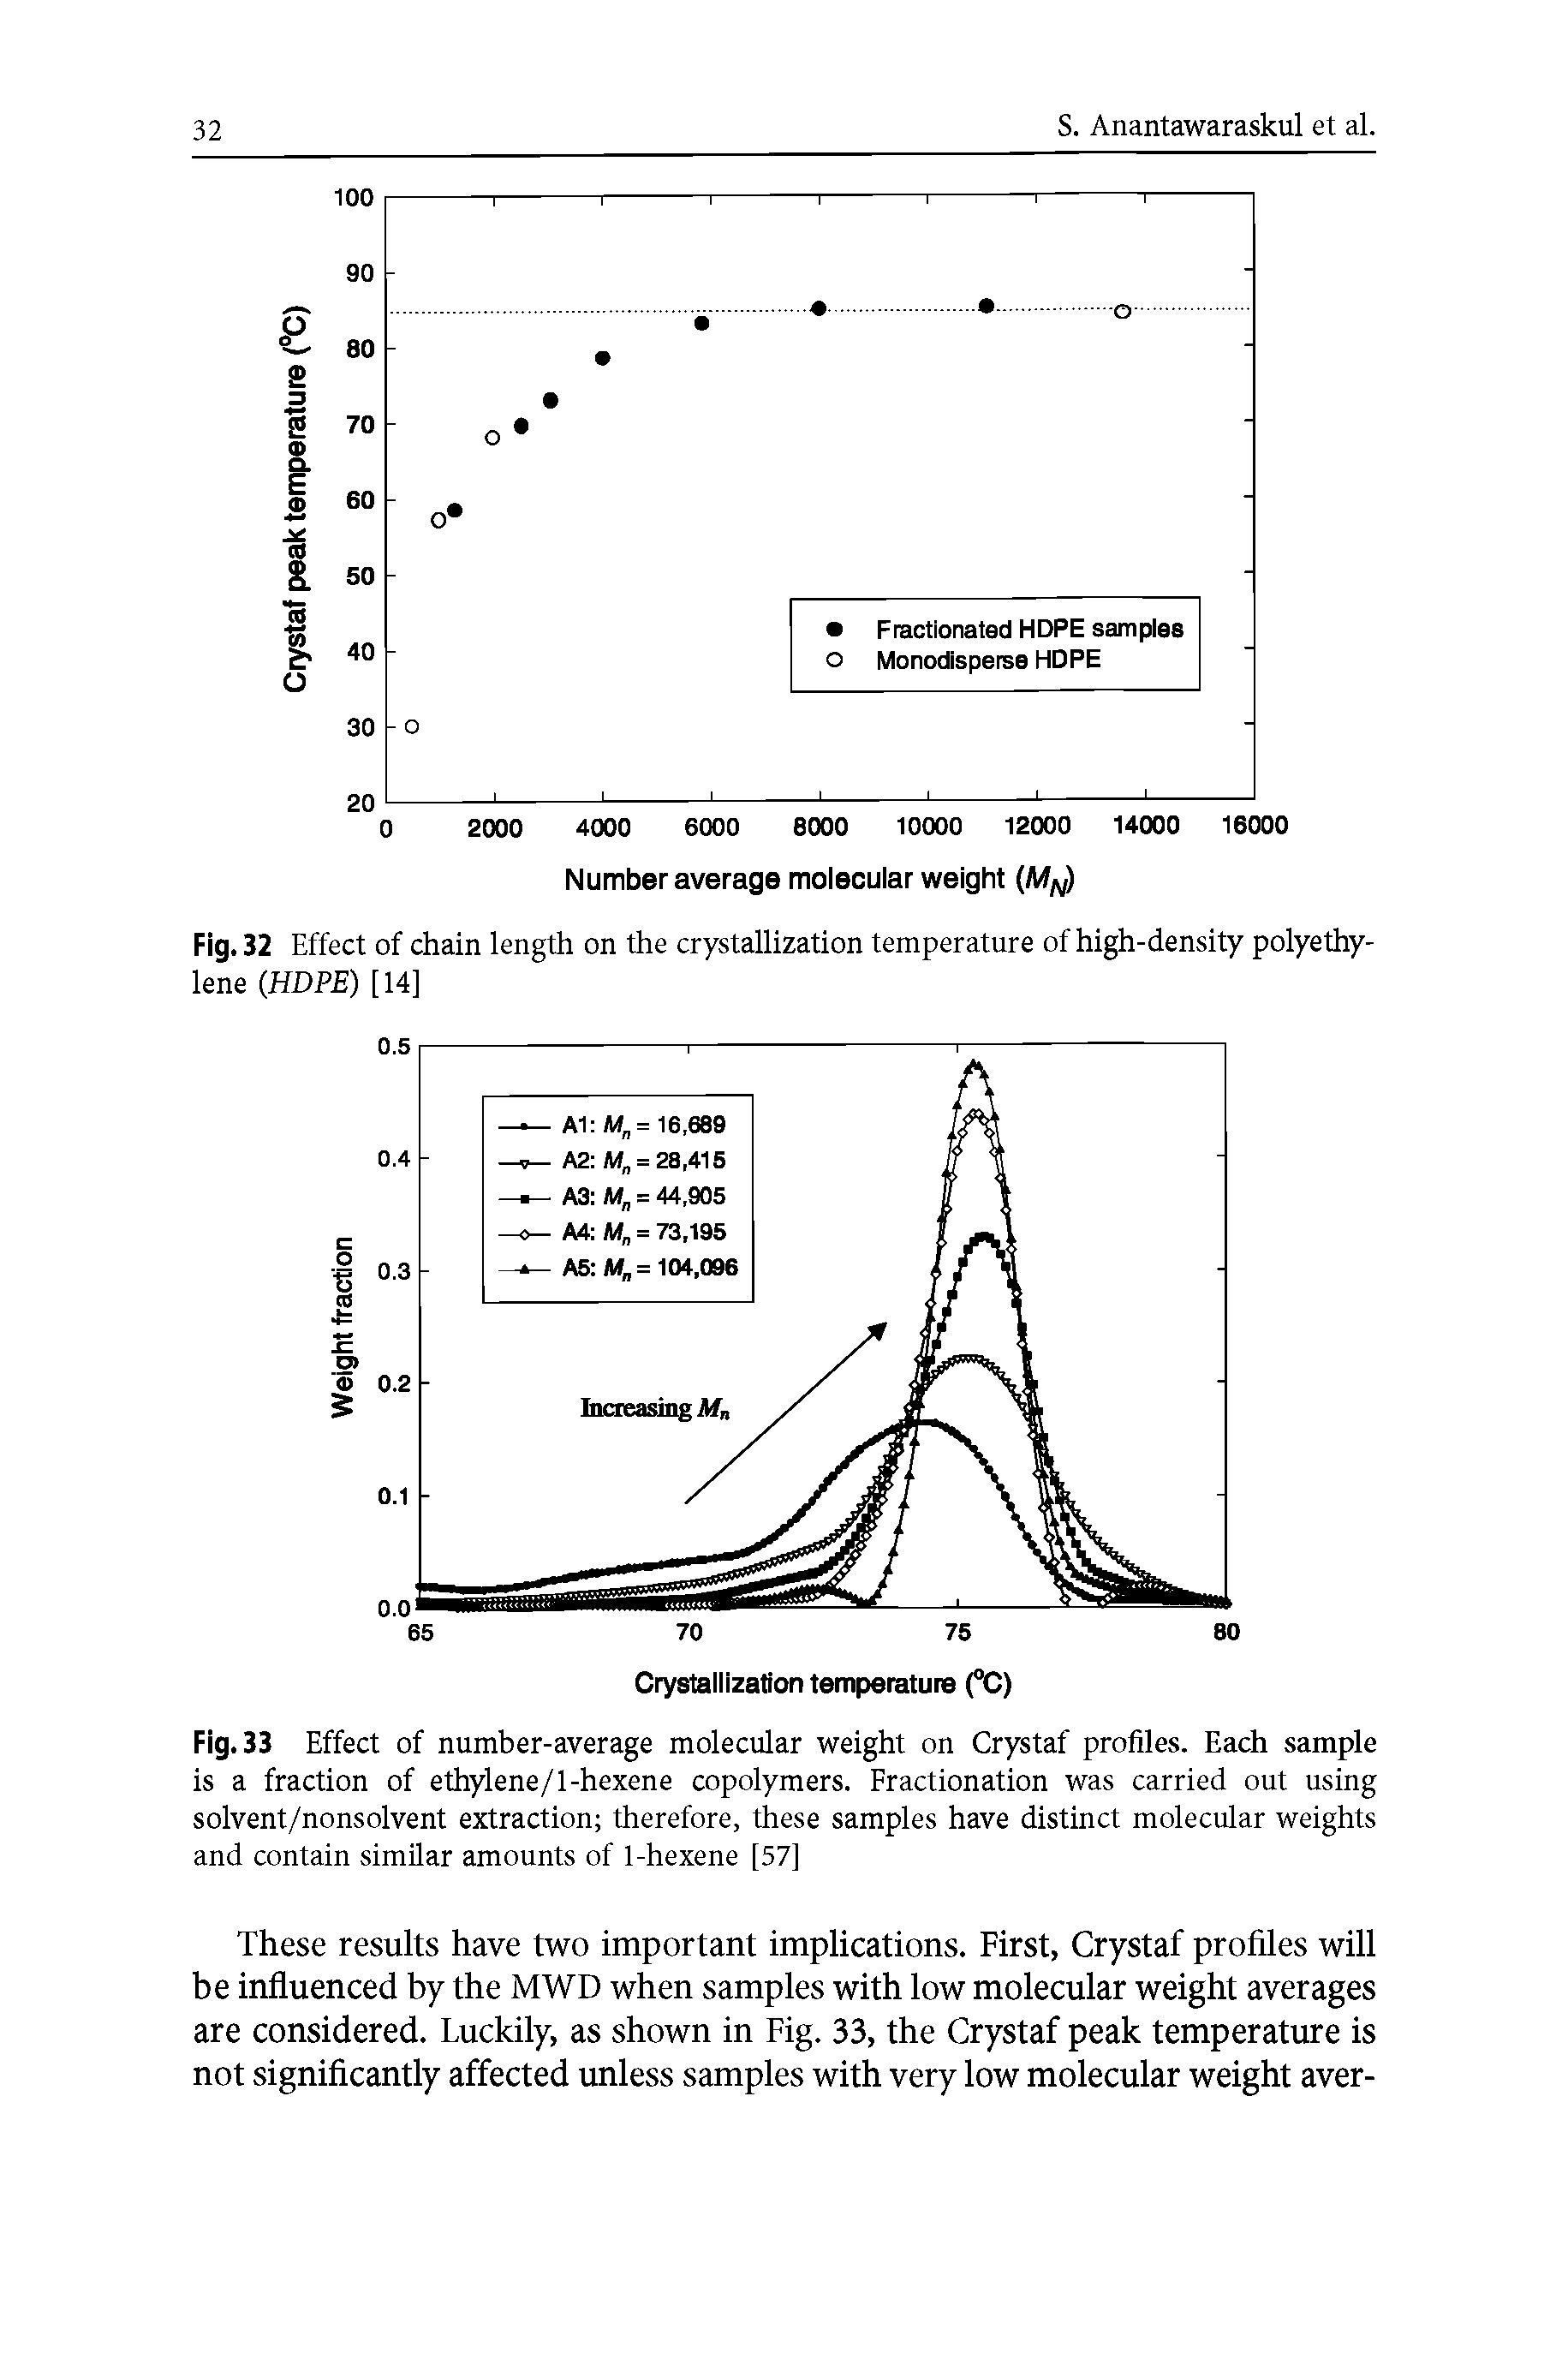 Fig. 33 Effect of number-average molecular weight on Crystaf profiles. Each sample is a fraction of ethylene/1-hexene copolymers. Fractionation was carried out using solvent/nonsolvent extraction therefore, these samples have distinct molecular weights and contain similar amounts of 1-hexene [57]...